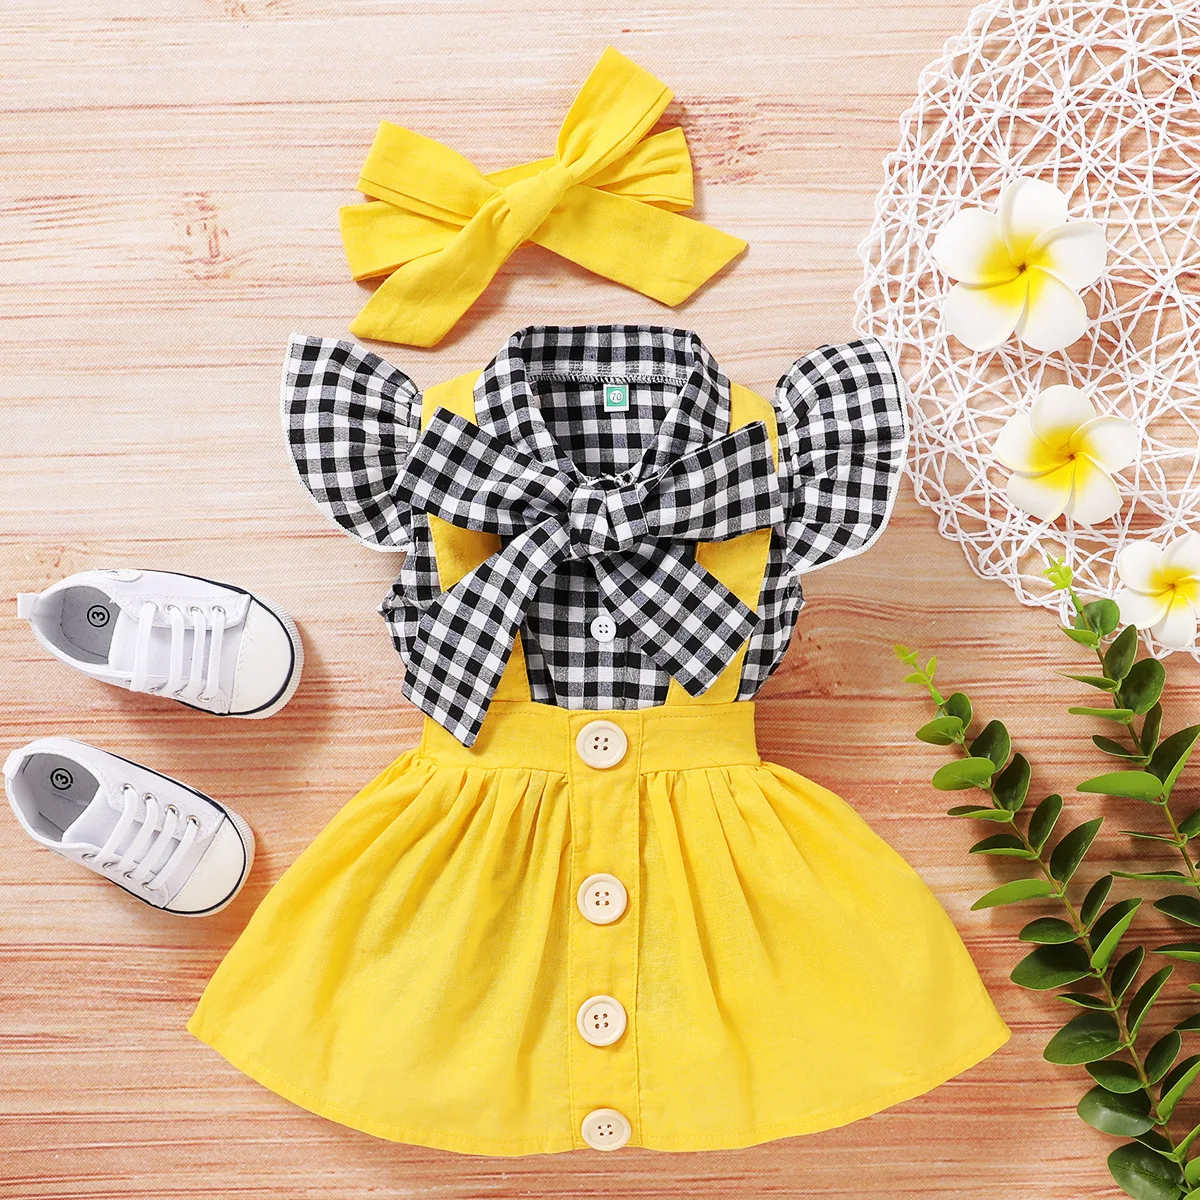 Summer Kids Newborn Baby Girl Plaid Bow T shirt+ Button Suspender Skirt Headband Outfits 2pcs Clothes Sets Toddler girl Outfit